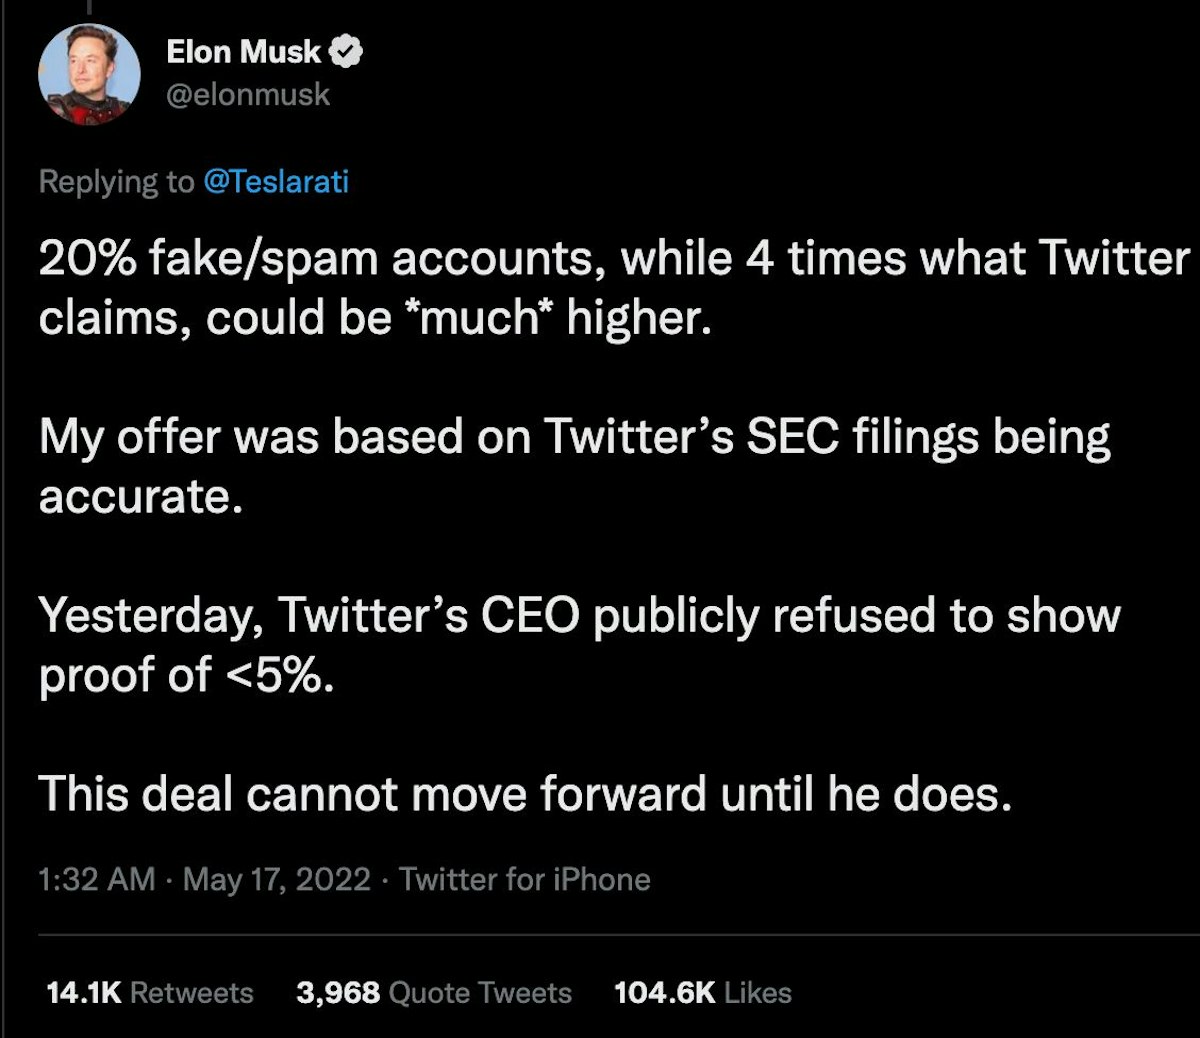 featured image - Musk publicly claimed Twitter's SEC filings inaccurate, while unable to provide evidence in court